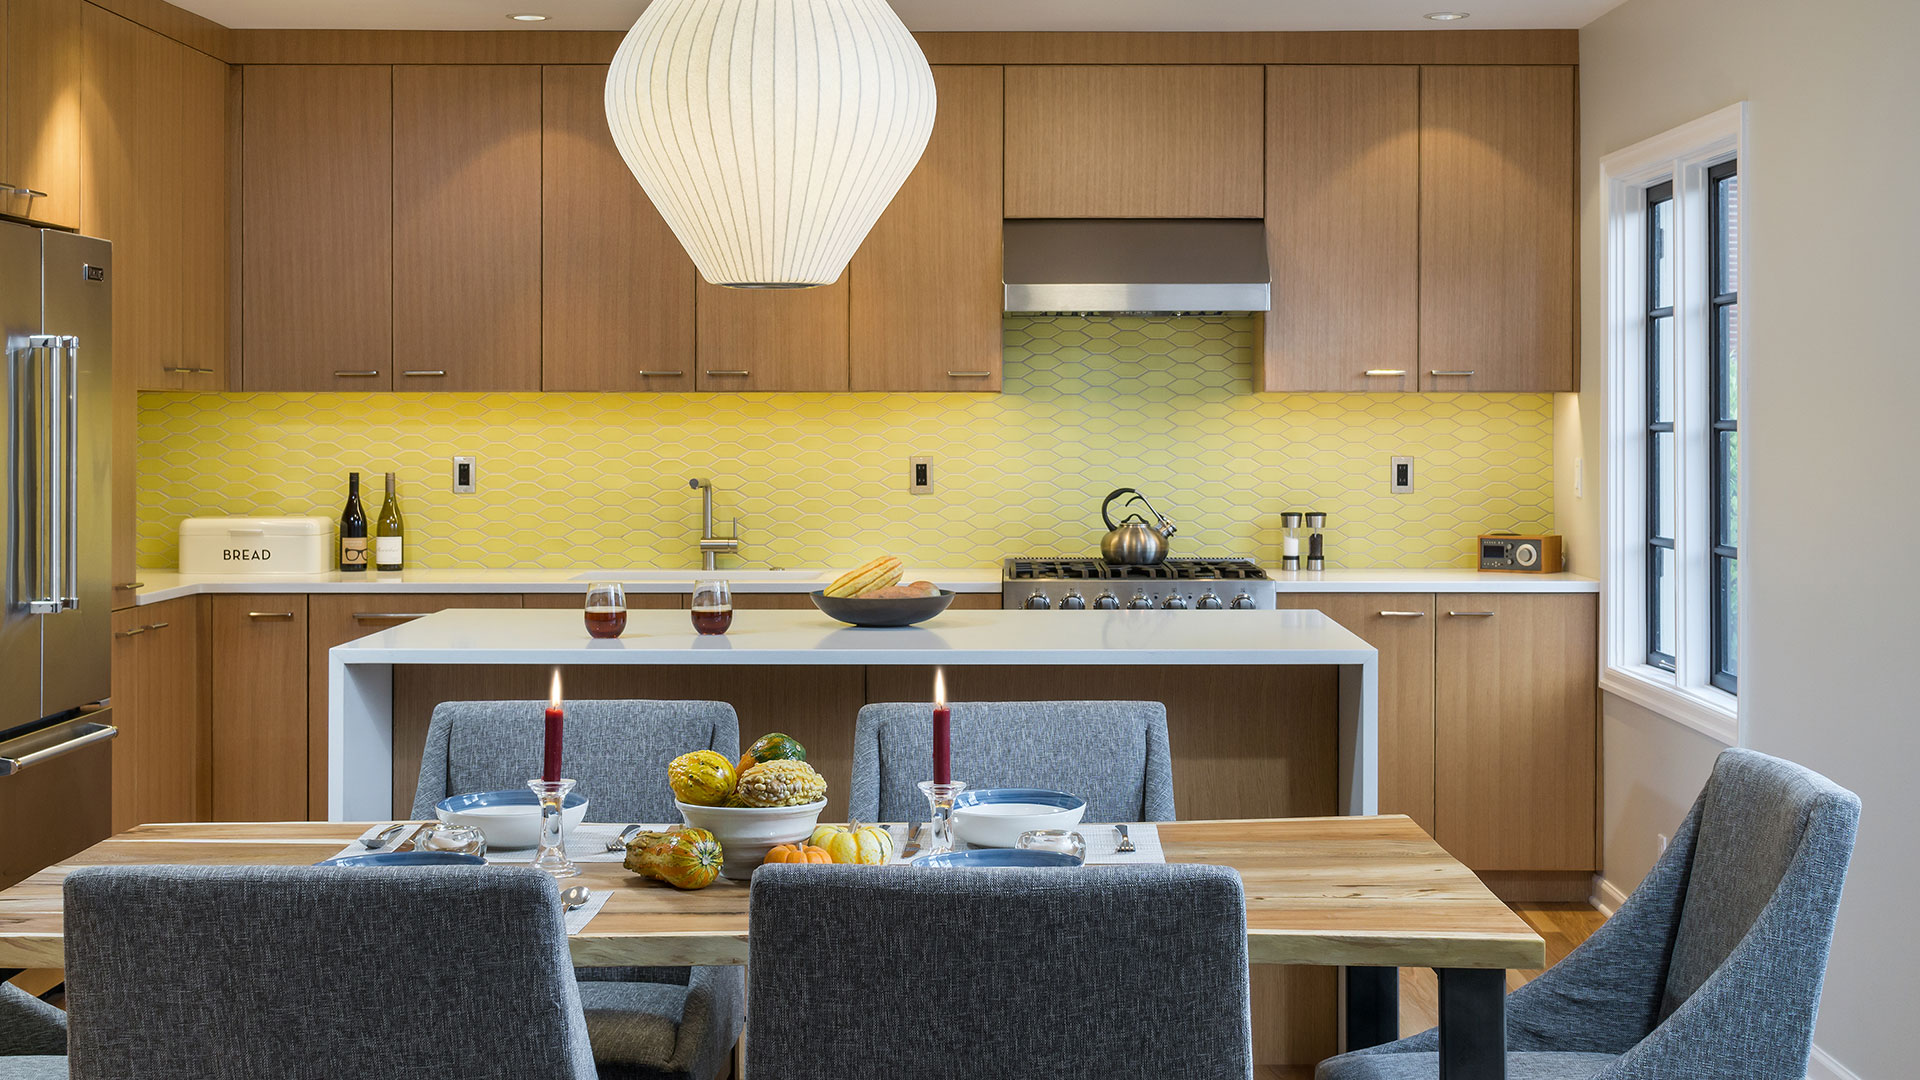 At the Alameda Modern, the focal point of the kitchen is a long wall with custom cabinetry, warm yellow tile, and a stainless steel range and hood.